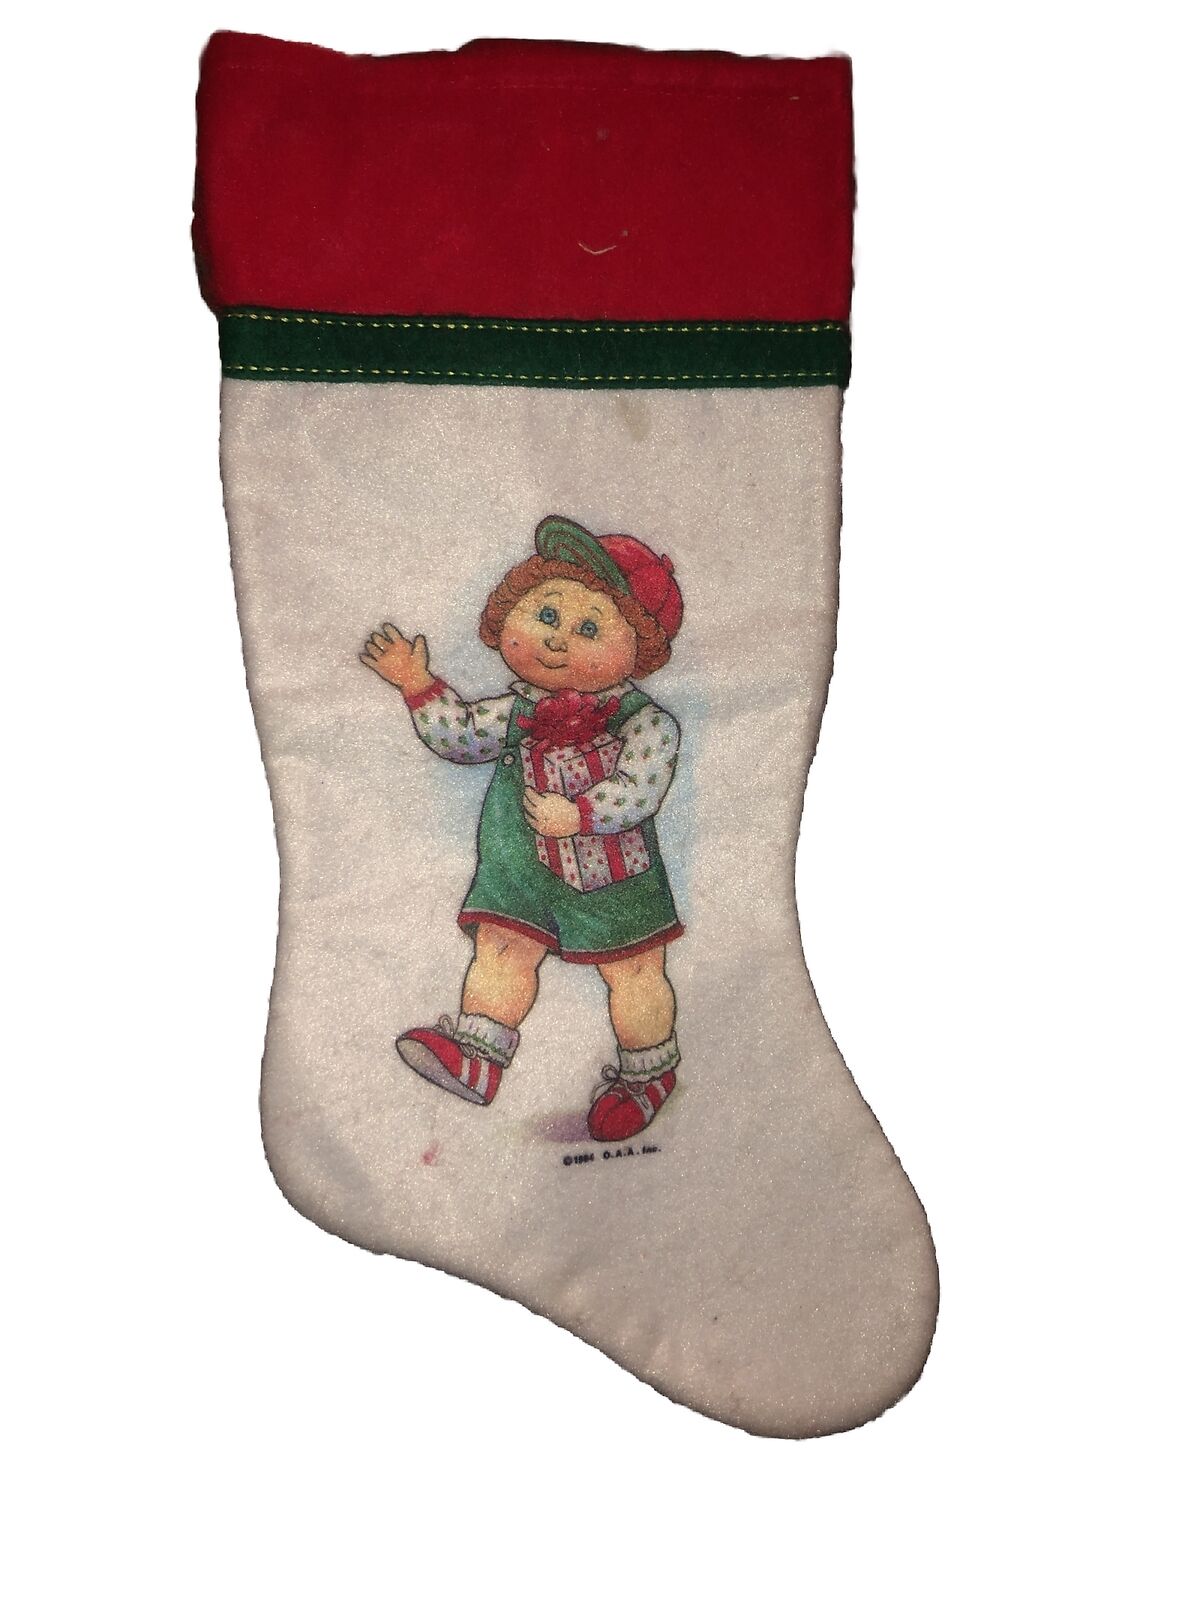 Vintage 1984 Cabbage Patch Kids Fleece Christmas Stocking With Boy Doll